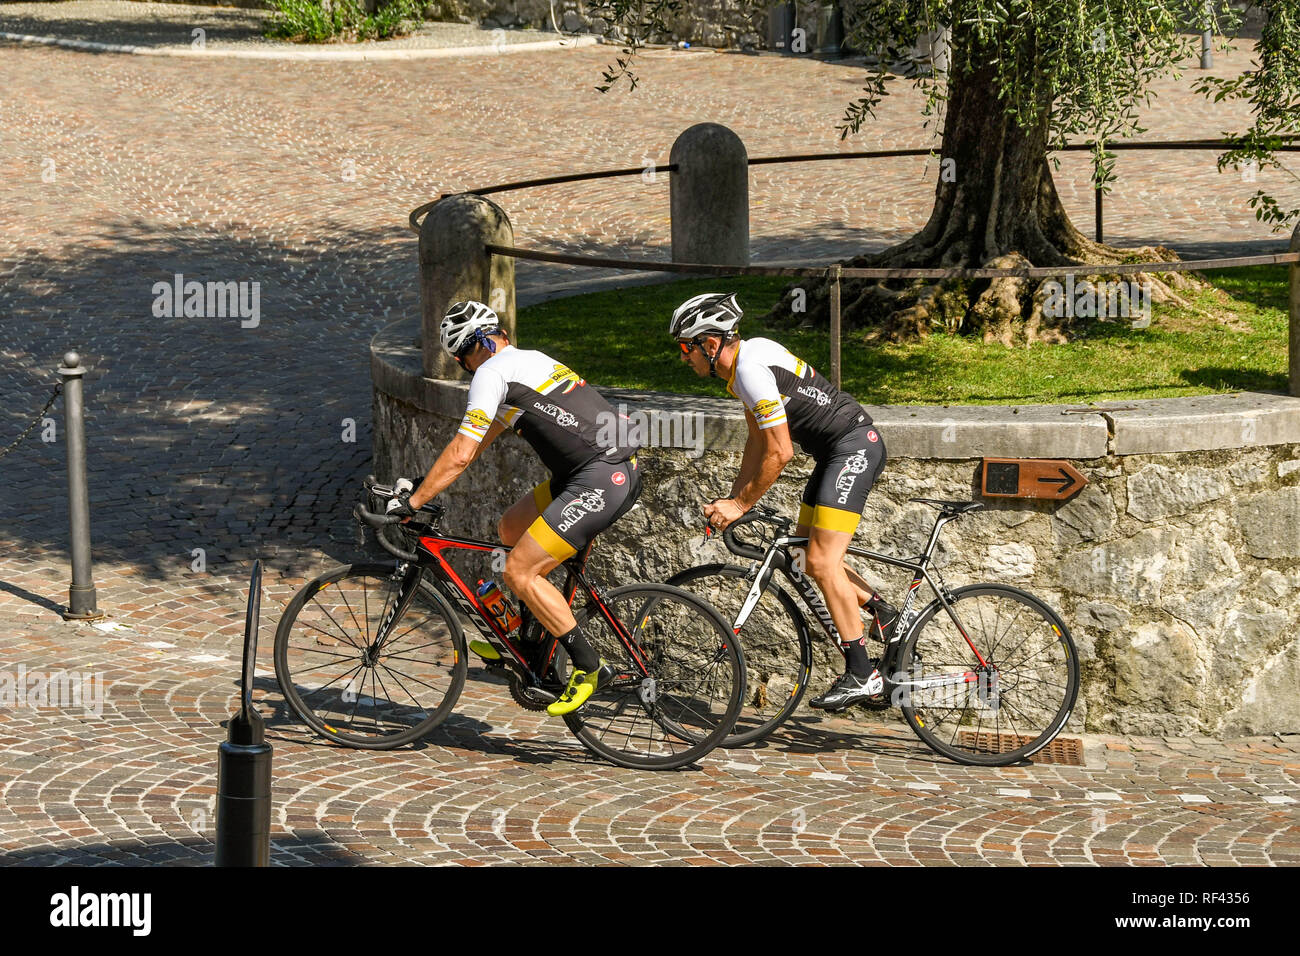 GARDONE RIVIERA, ITALY - SEPTEMBER 2018: Two cyclists pedalling up the steep hill outside the Vittoriale degli Italiani gardens in Gardone Riviera. Stock Photo